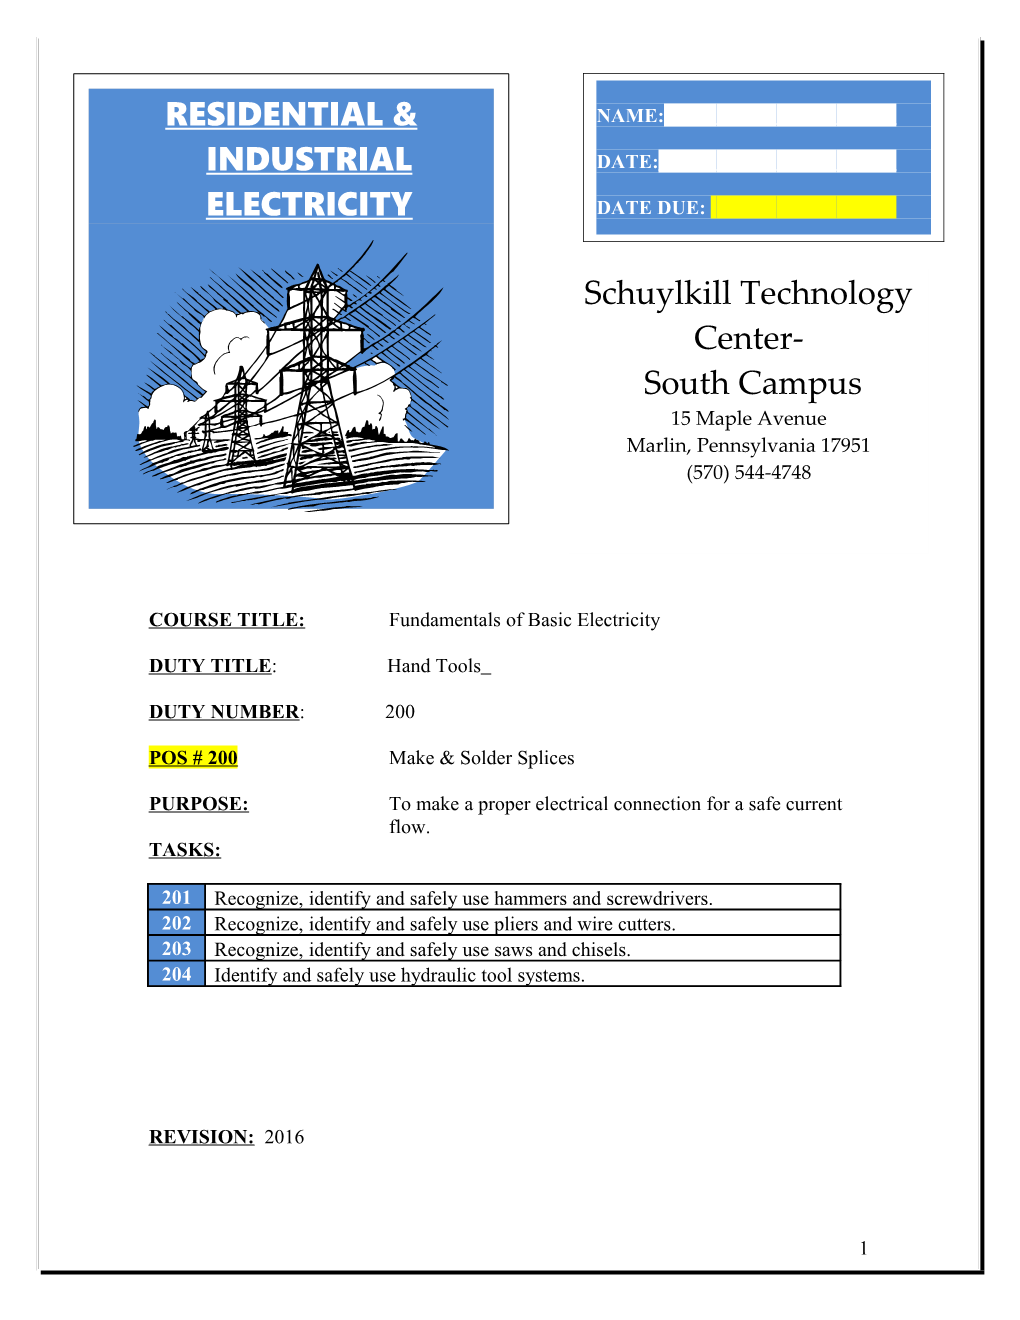 COURSE TITLE:Fundamentals of Basic Electricity